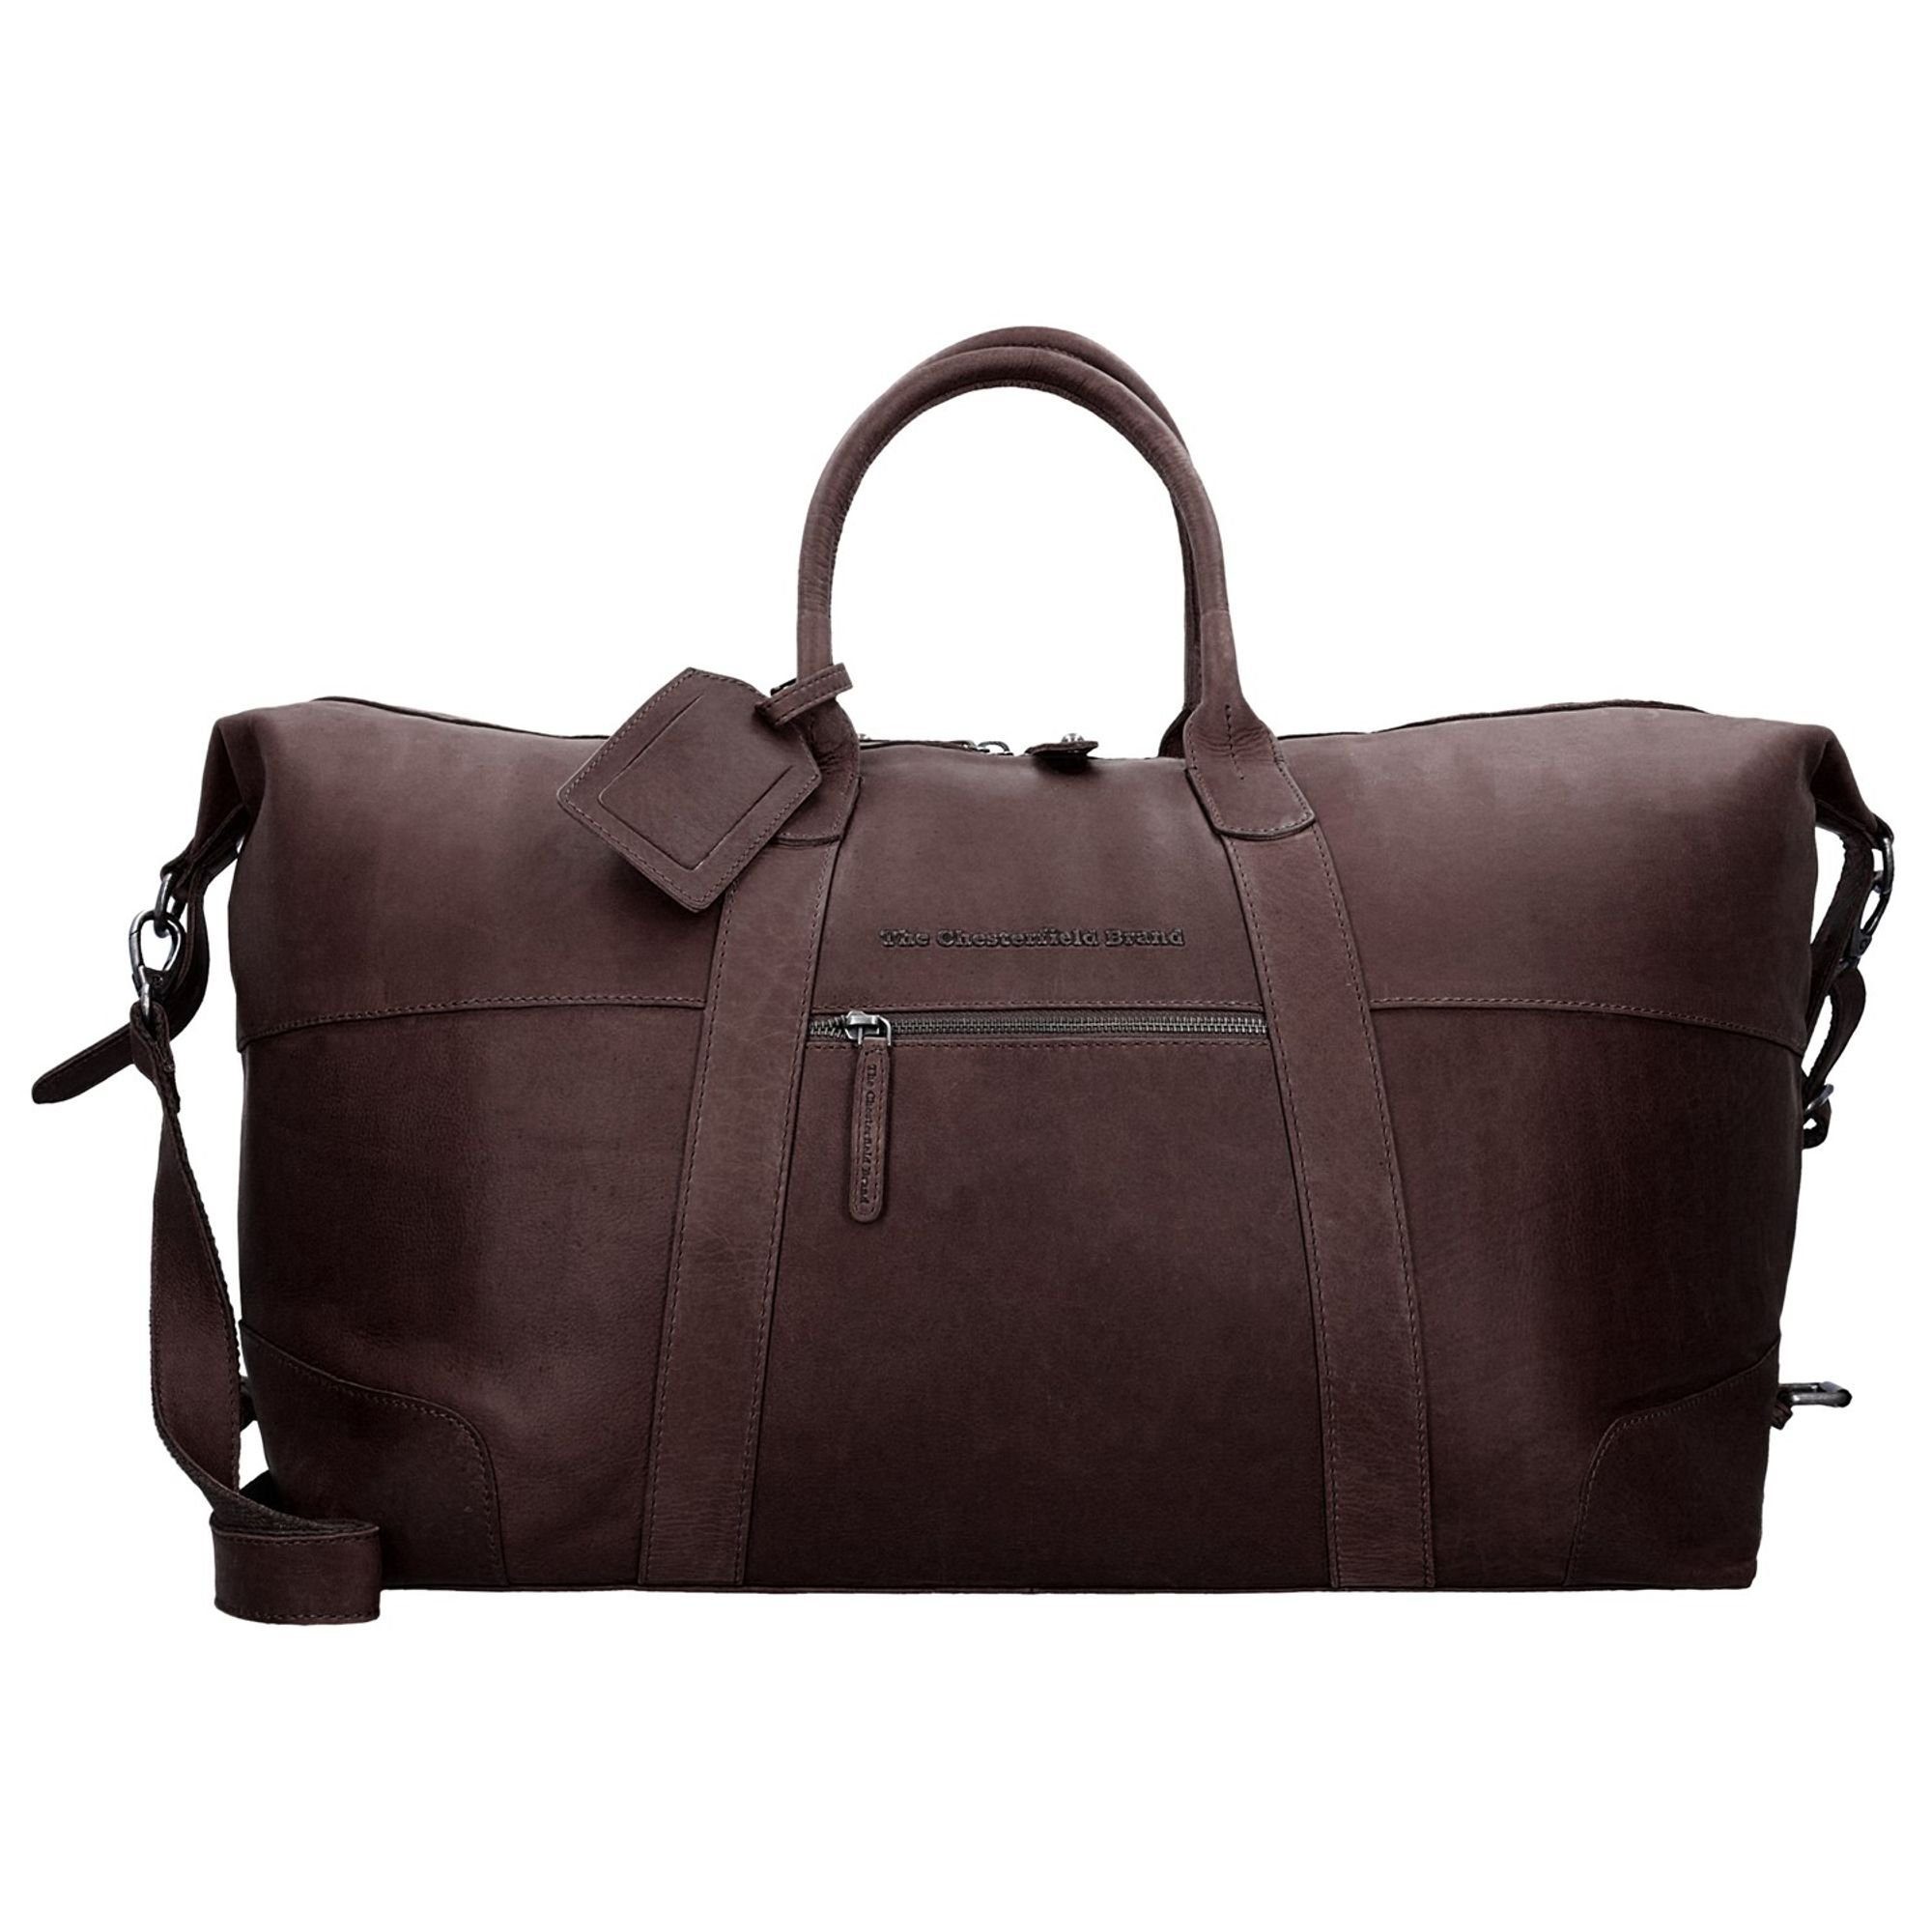 The Chesterfield Brand Weekender Wax Pull Up, Leder brown